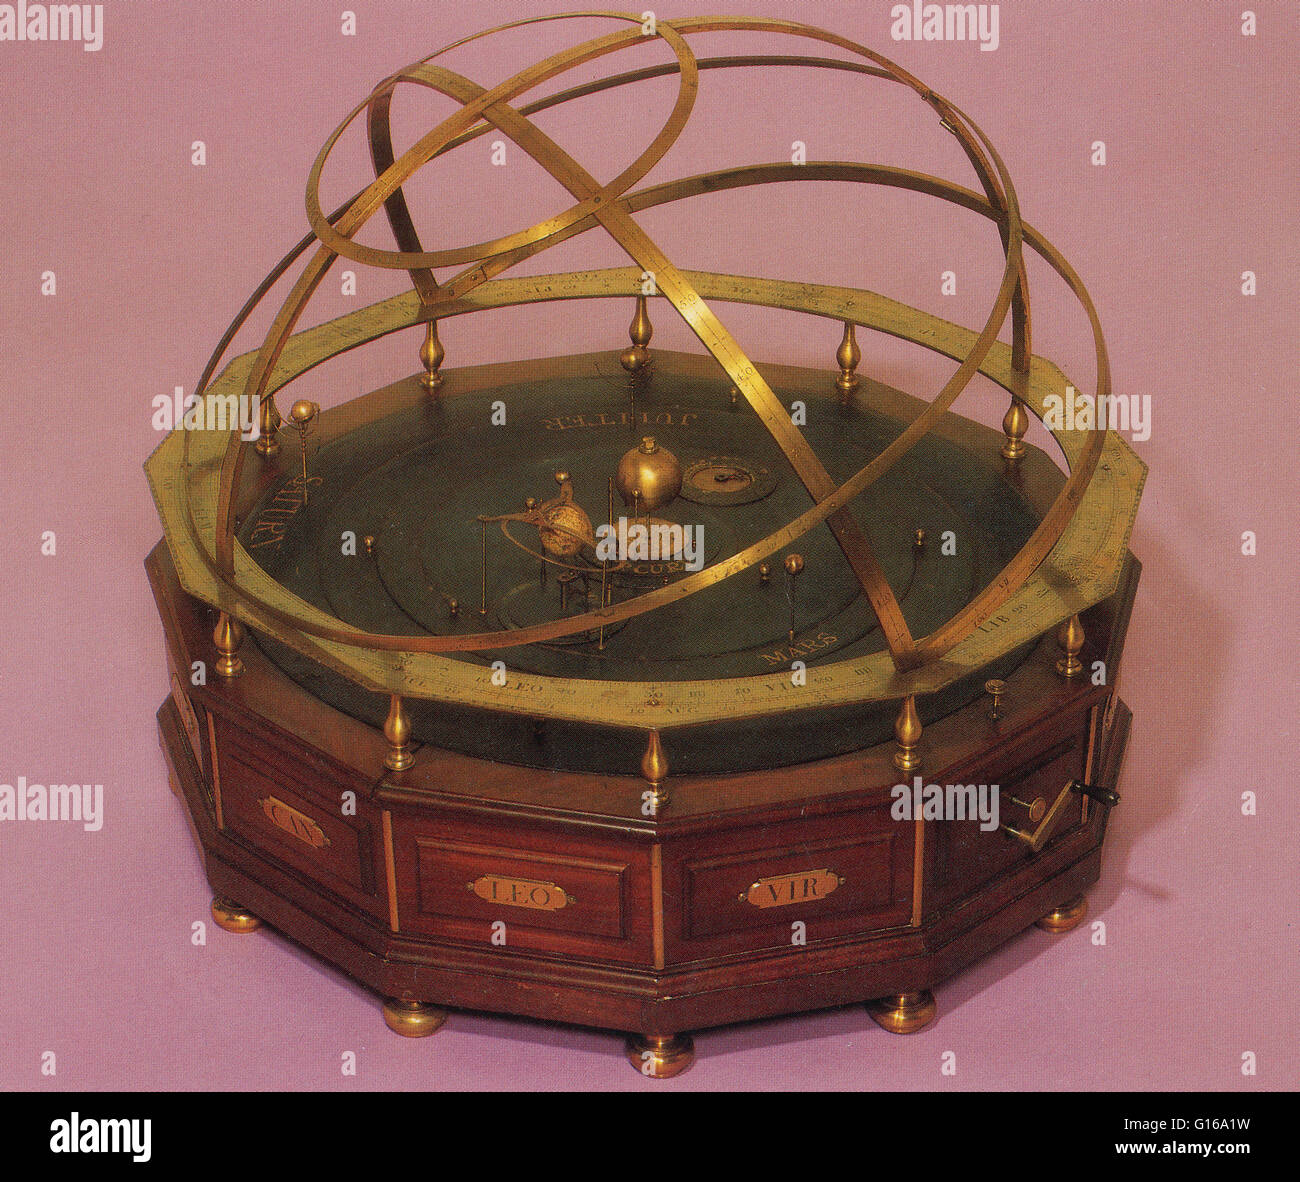 An orrery is a mechanical device that illustrates the relative positions and motions of the planets and moons in the Solar System in a heliocentric model. Though the Greeks had working planetaria, the first orrery that was a planetarium of the modern era Stock Photo